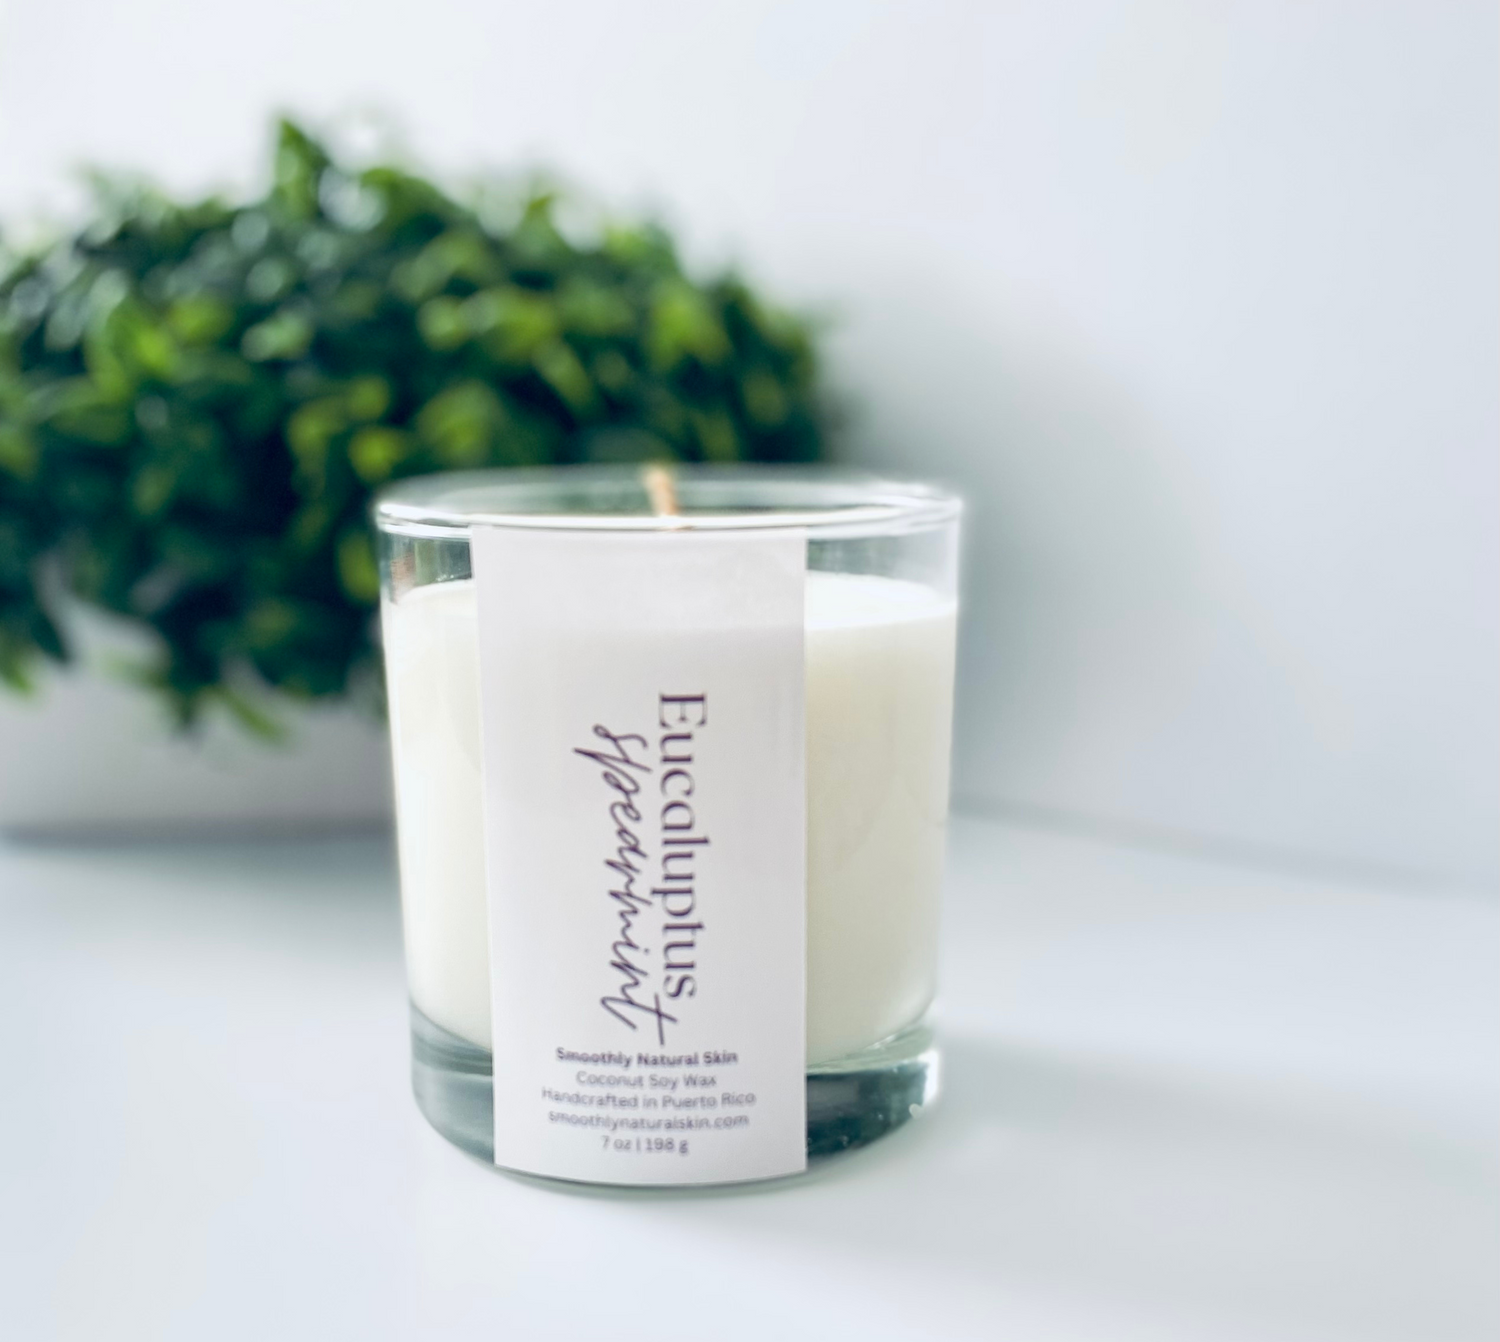 Eucalyptus Spearmint  Coconut soy wax candle – Smoothly Natural Skin